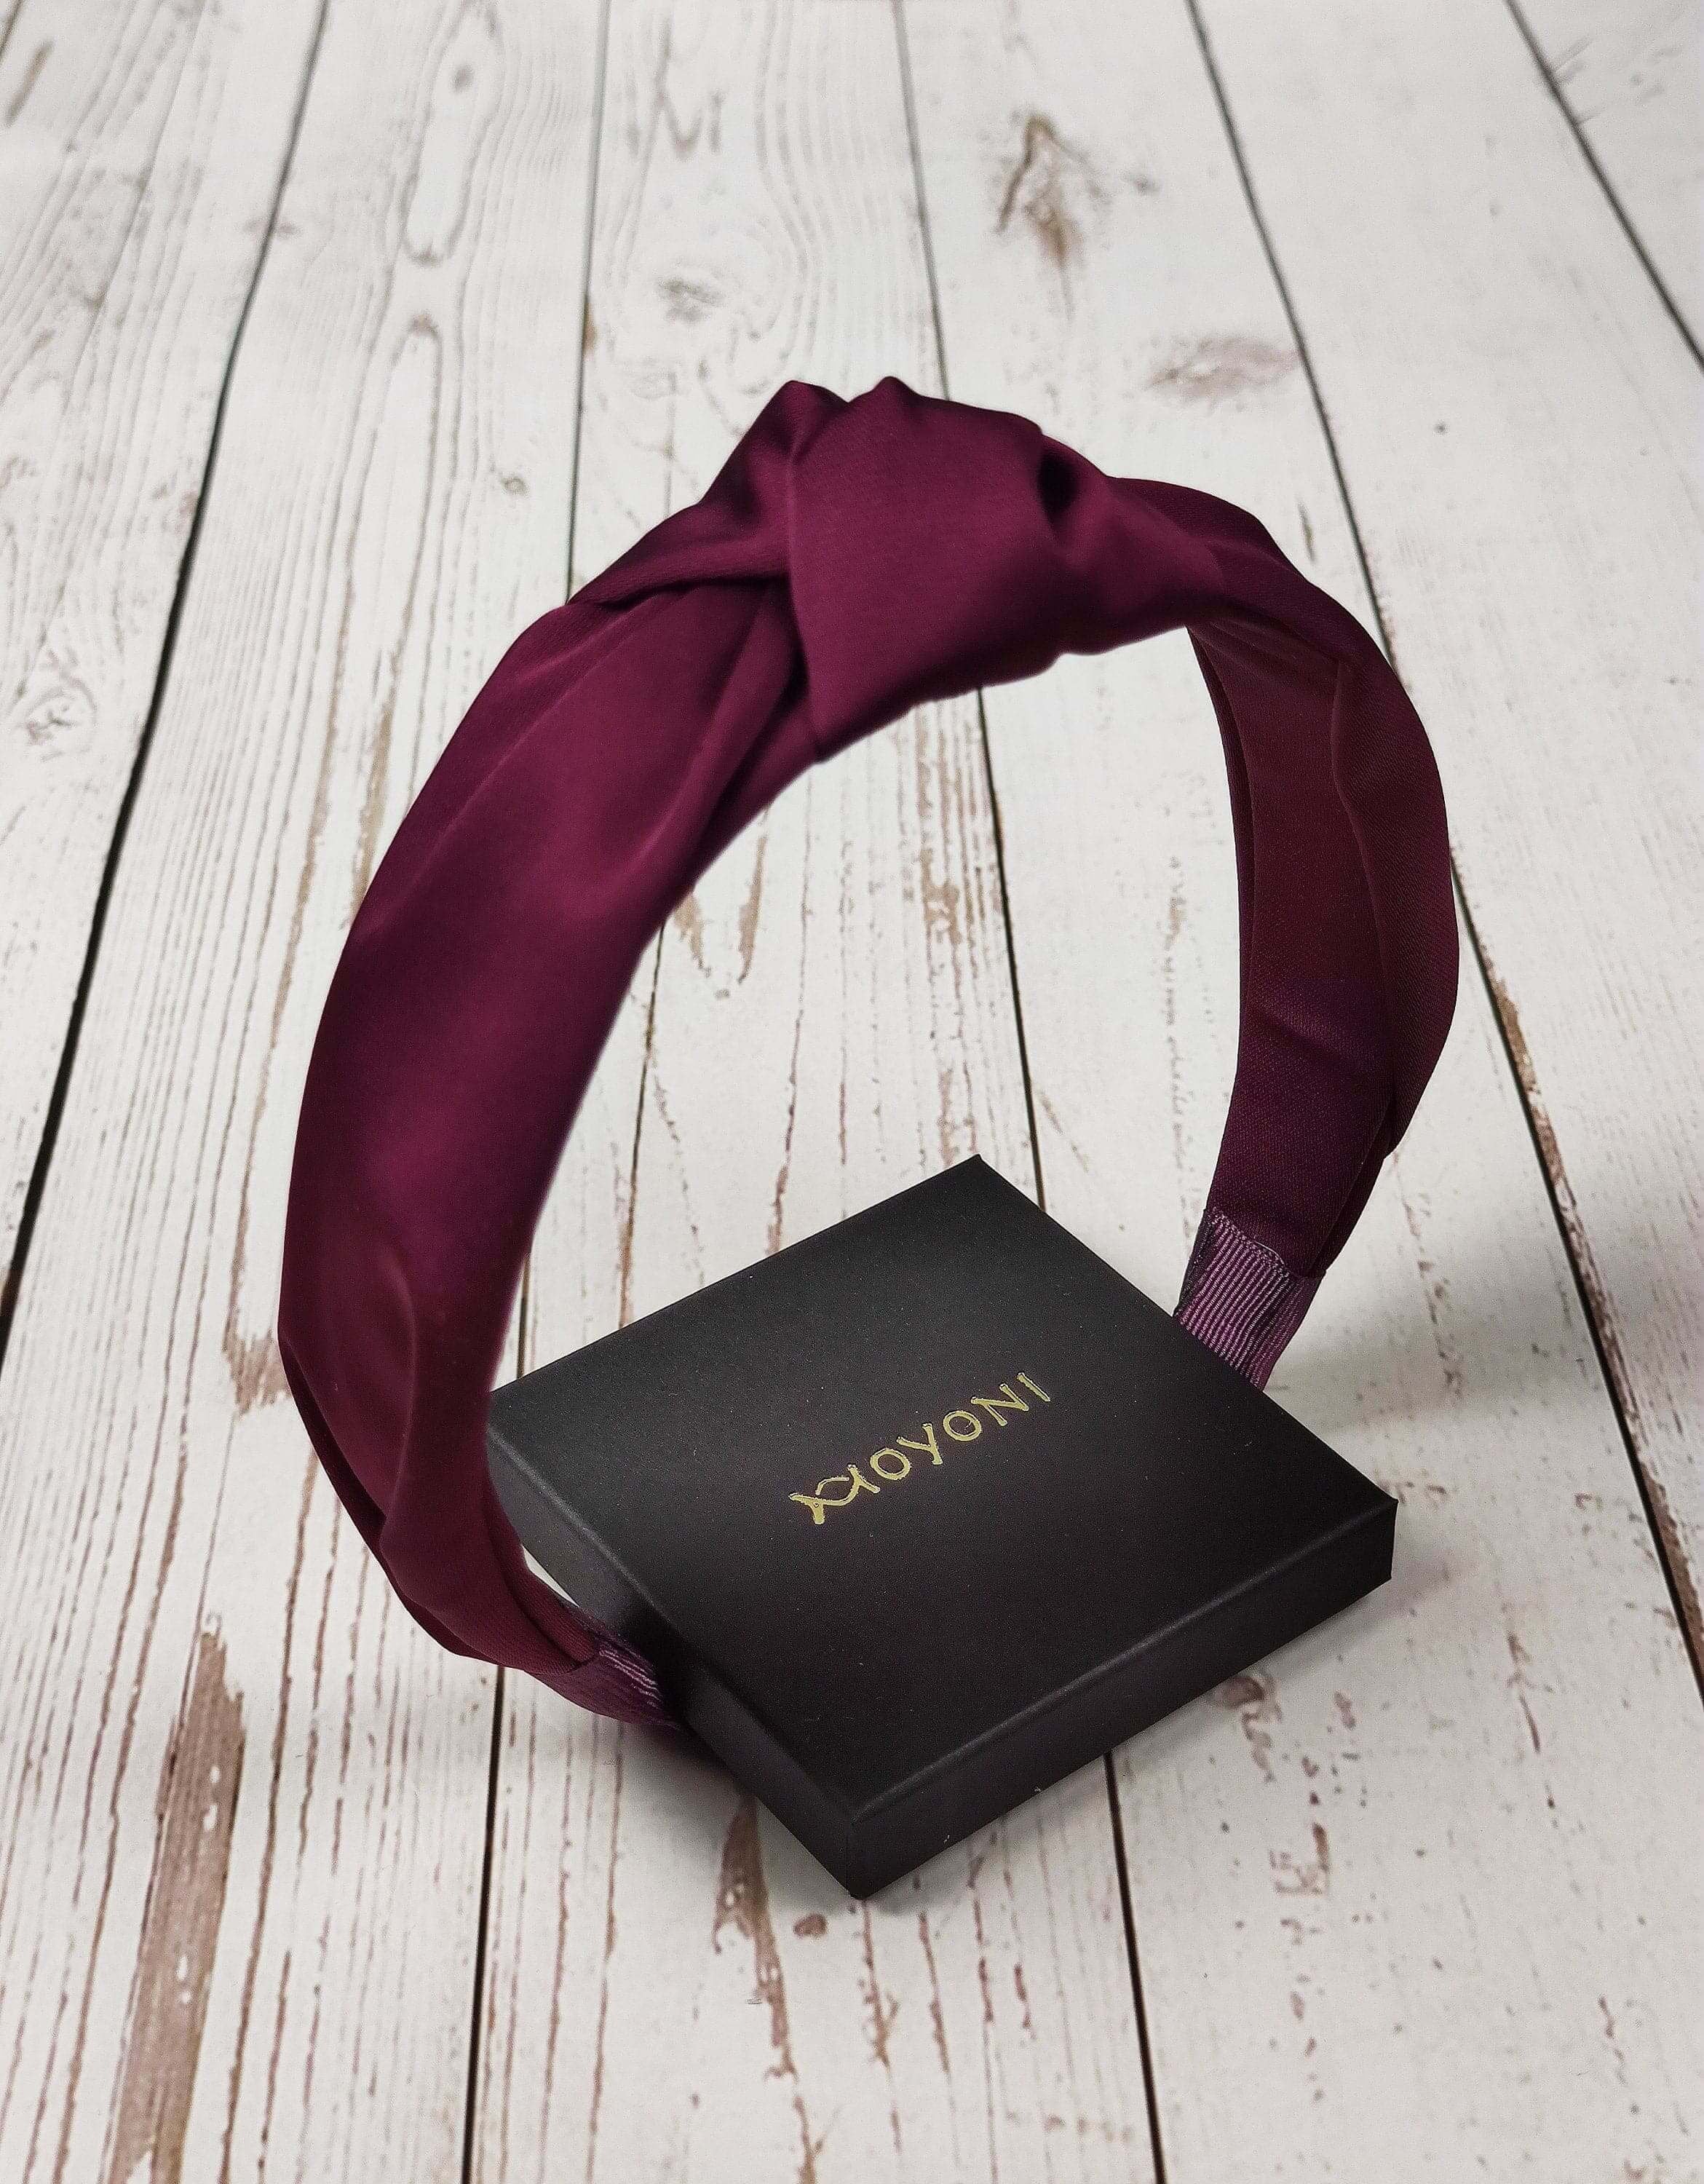 Stay stylish and on-trend with this classic maroon satin headband, perfect for any hairstyle.